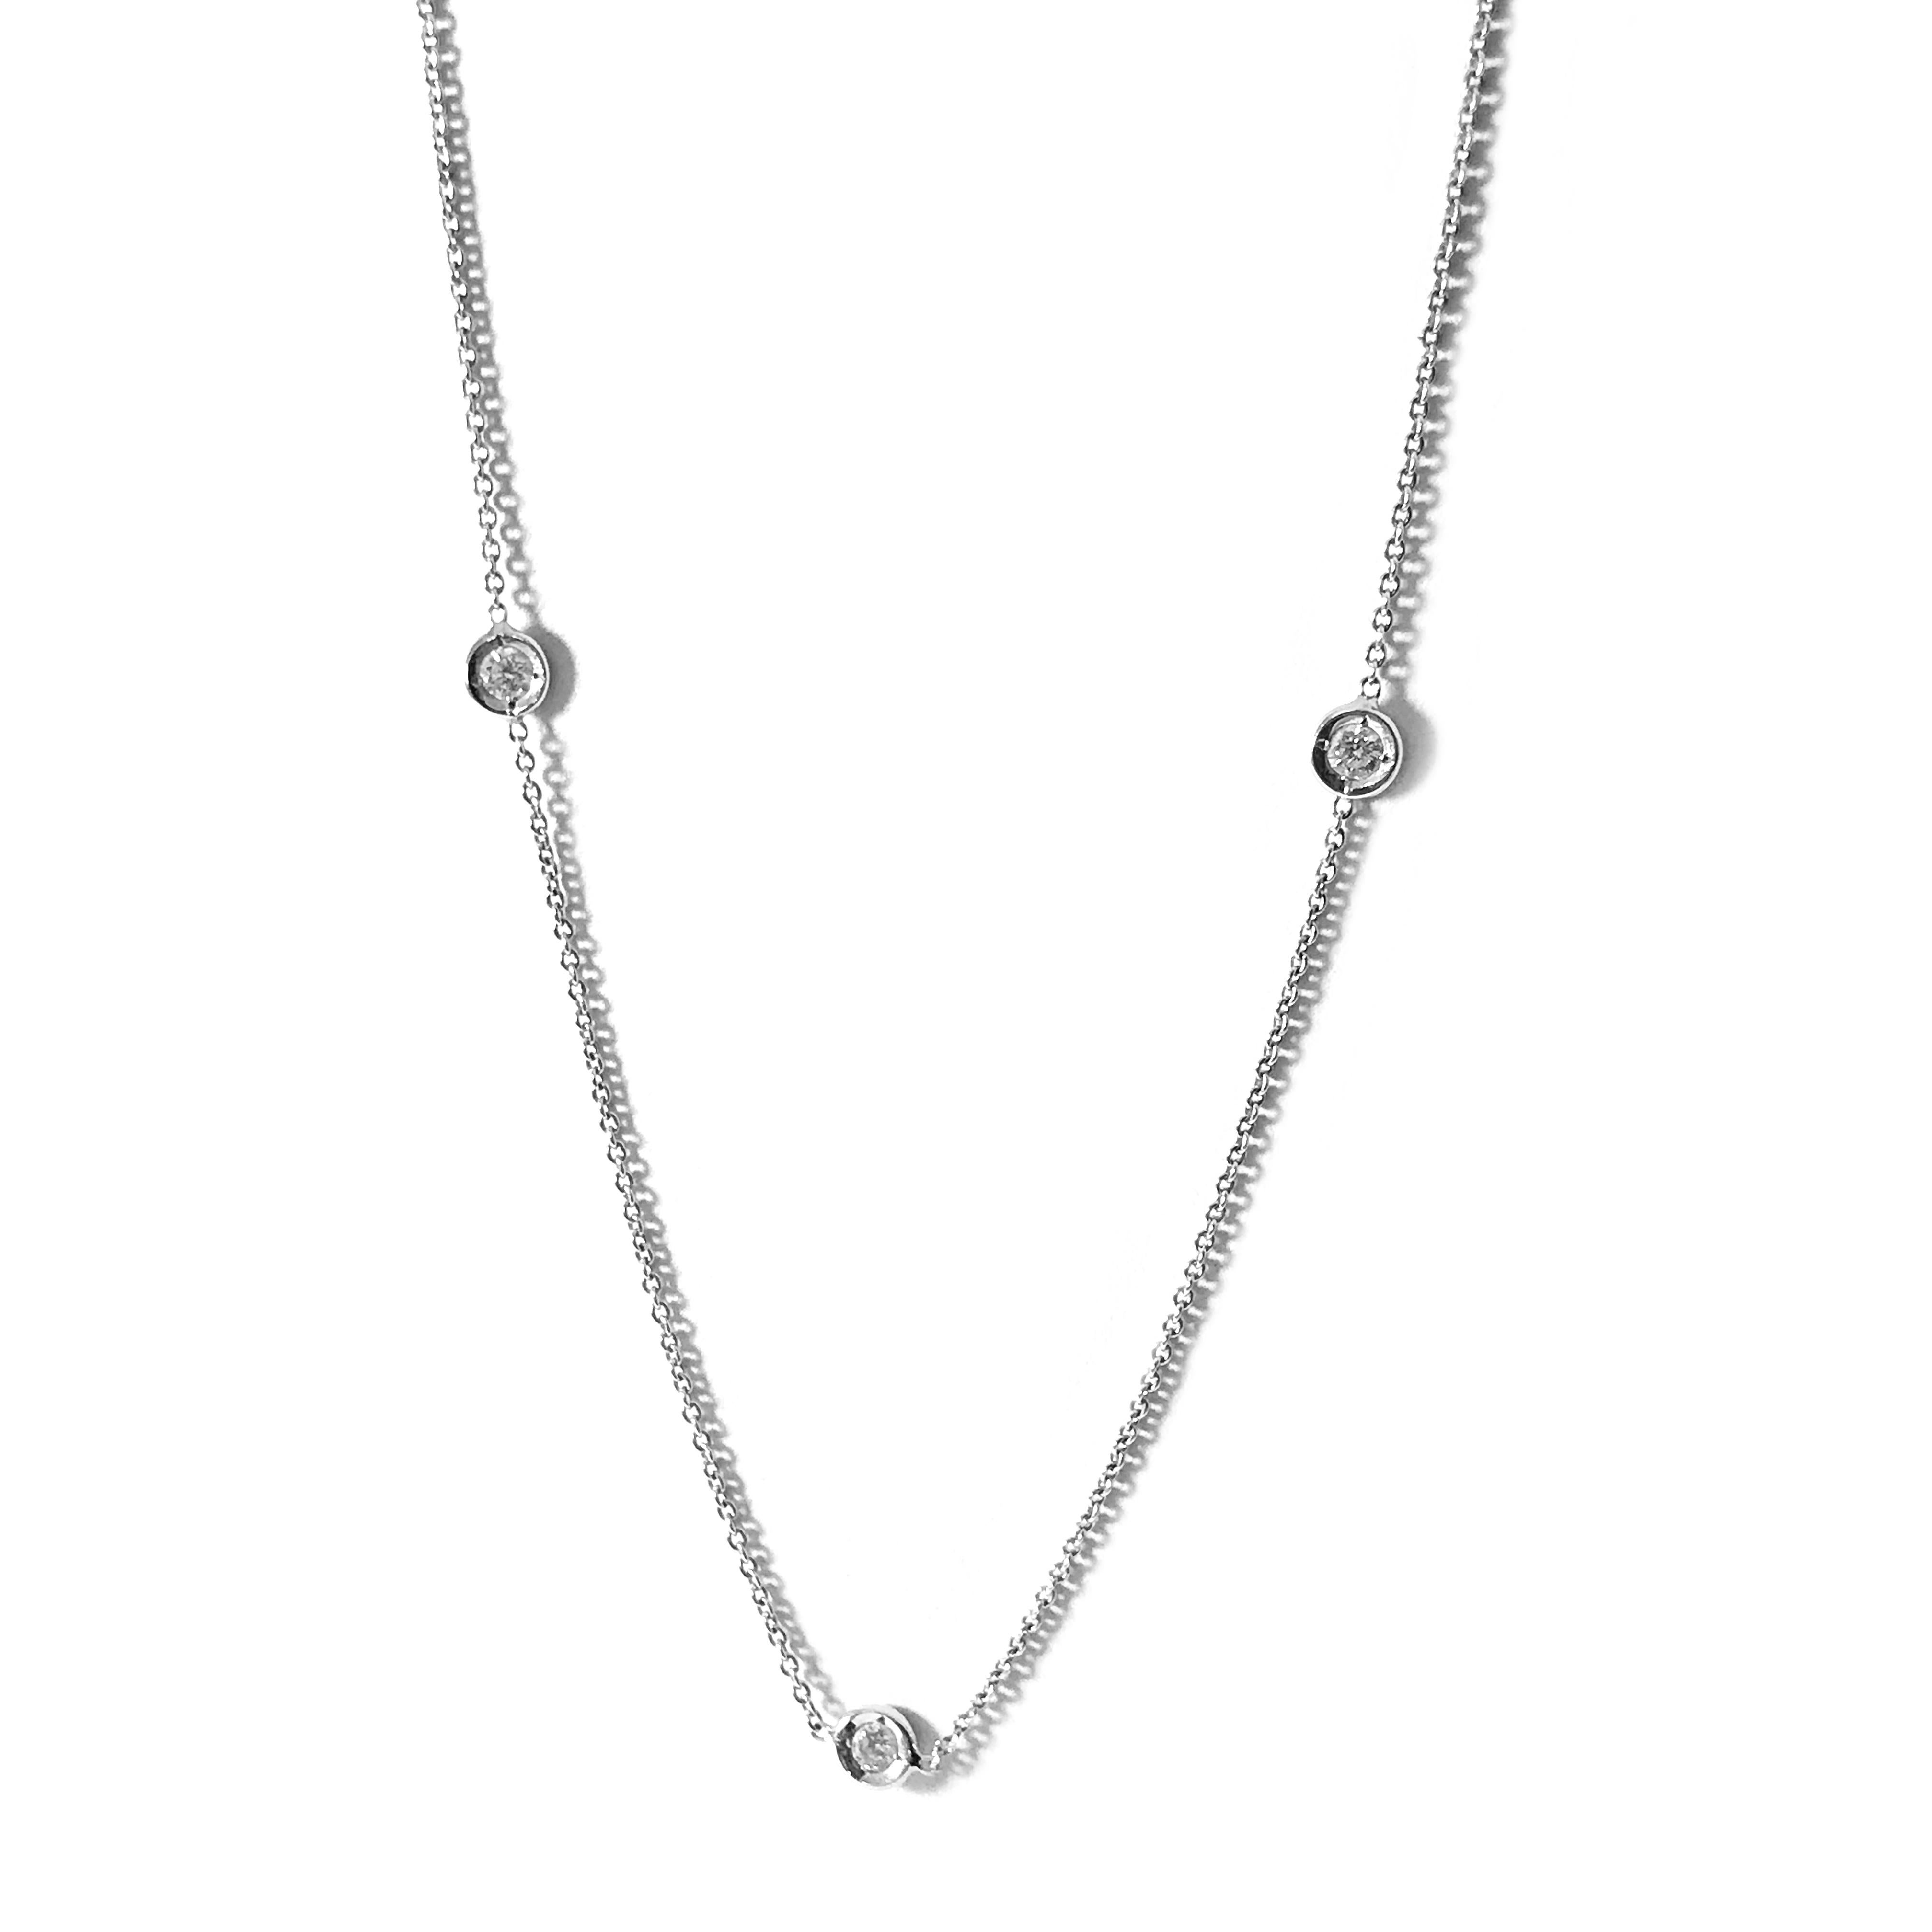 Classic Roberto Coin 18 Karat Diamonds By The Inch Necklace. Three exquisite diamonds are showcased in circle stations. Diamonds are VS  (G.I.A.) in clarity and G-H (G.I.A.)  in color for a total weight of 0.15ctw. A single Ruby cabochon is featured